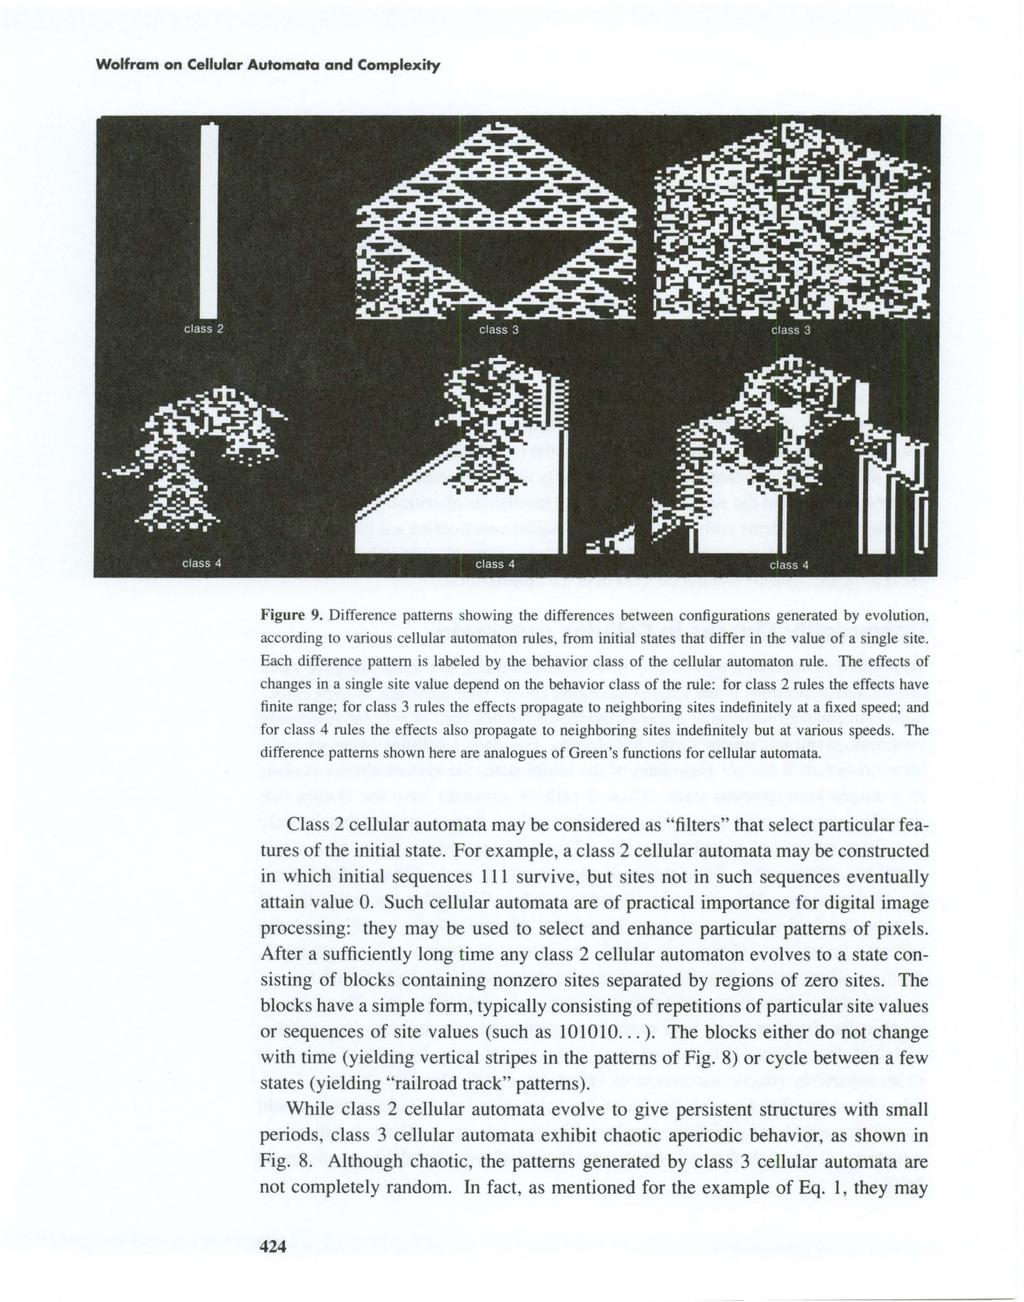 Wolfram on Cellular Automata and Complexity Figure 9. Difference patterns showing the differences between configurations generated by evolution, according to various cellular automaton rules.